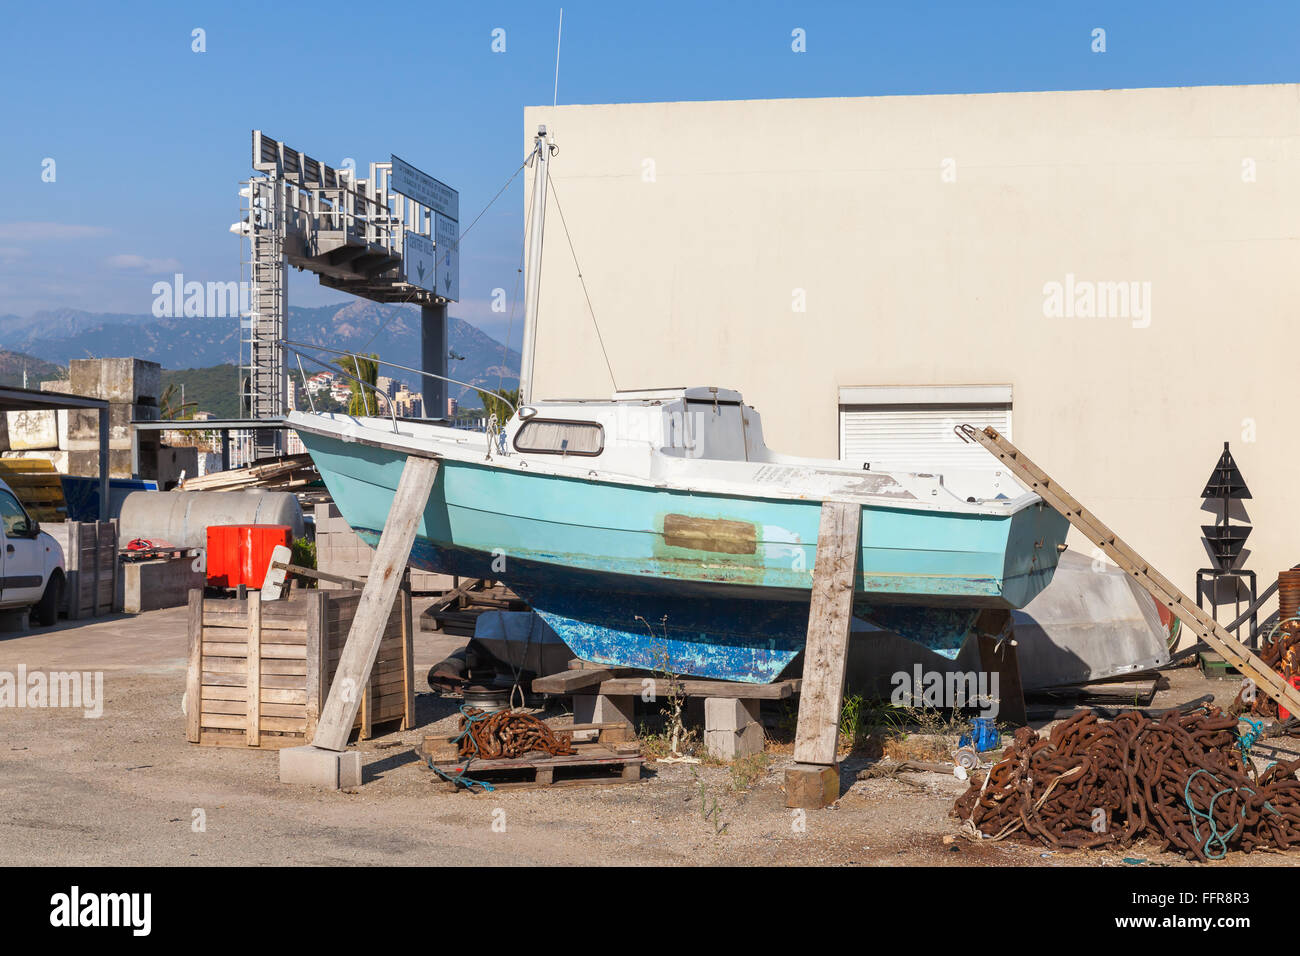 Old wooden yacht repairing, port of Ajaccio, Corsica, France Stock Photo